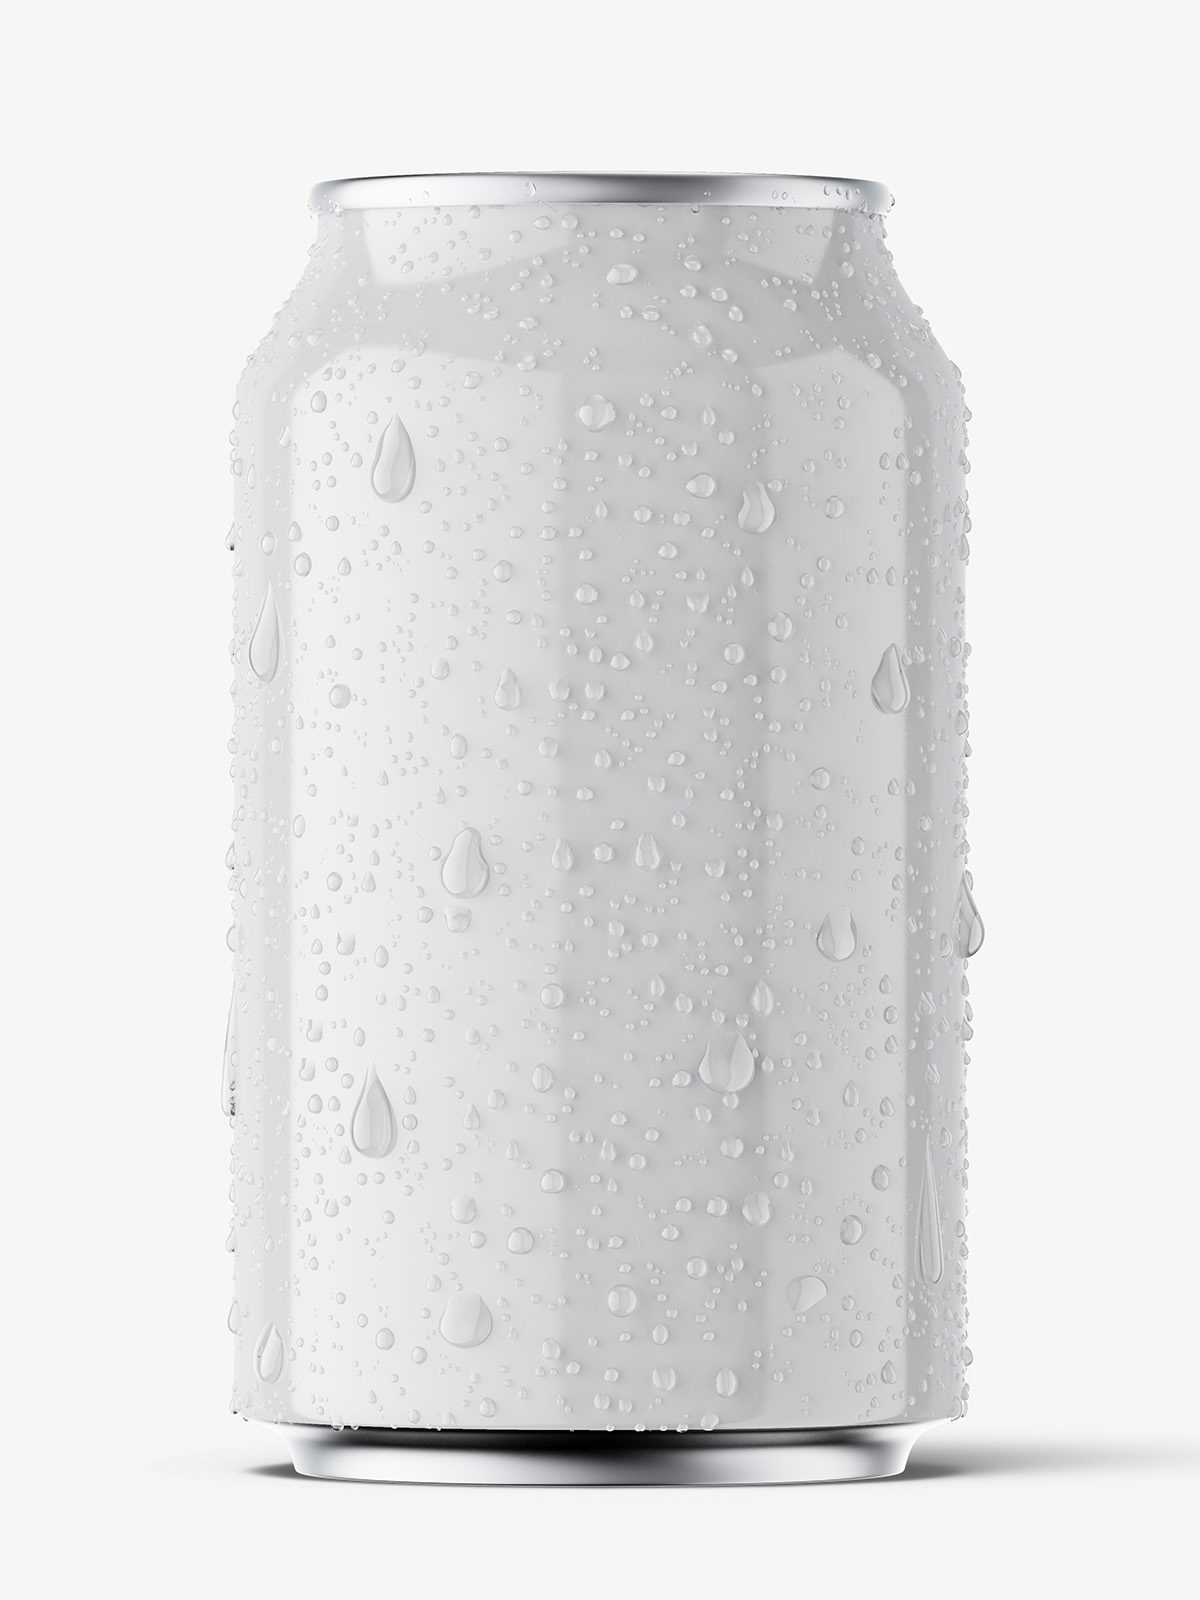 Download Glossy Beer Can With Condensation Mockup 330 Ml Smarty Mockups